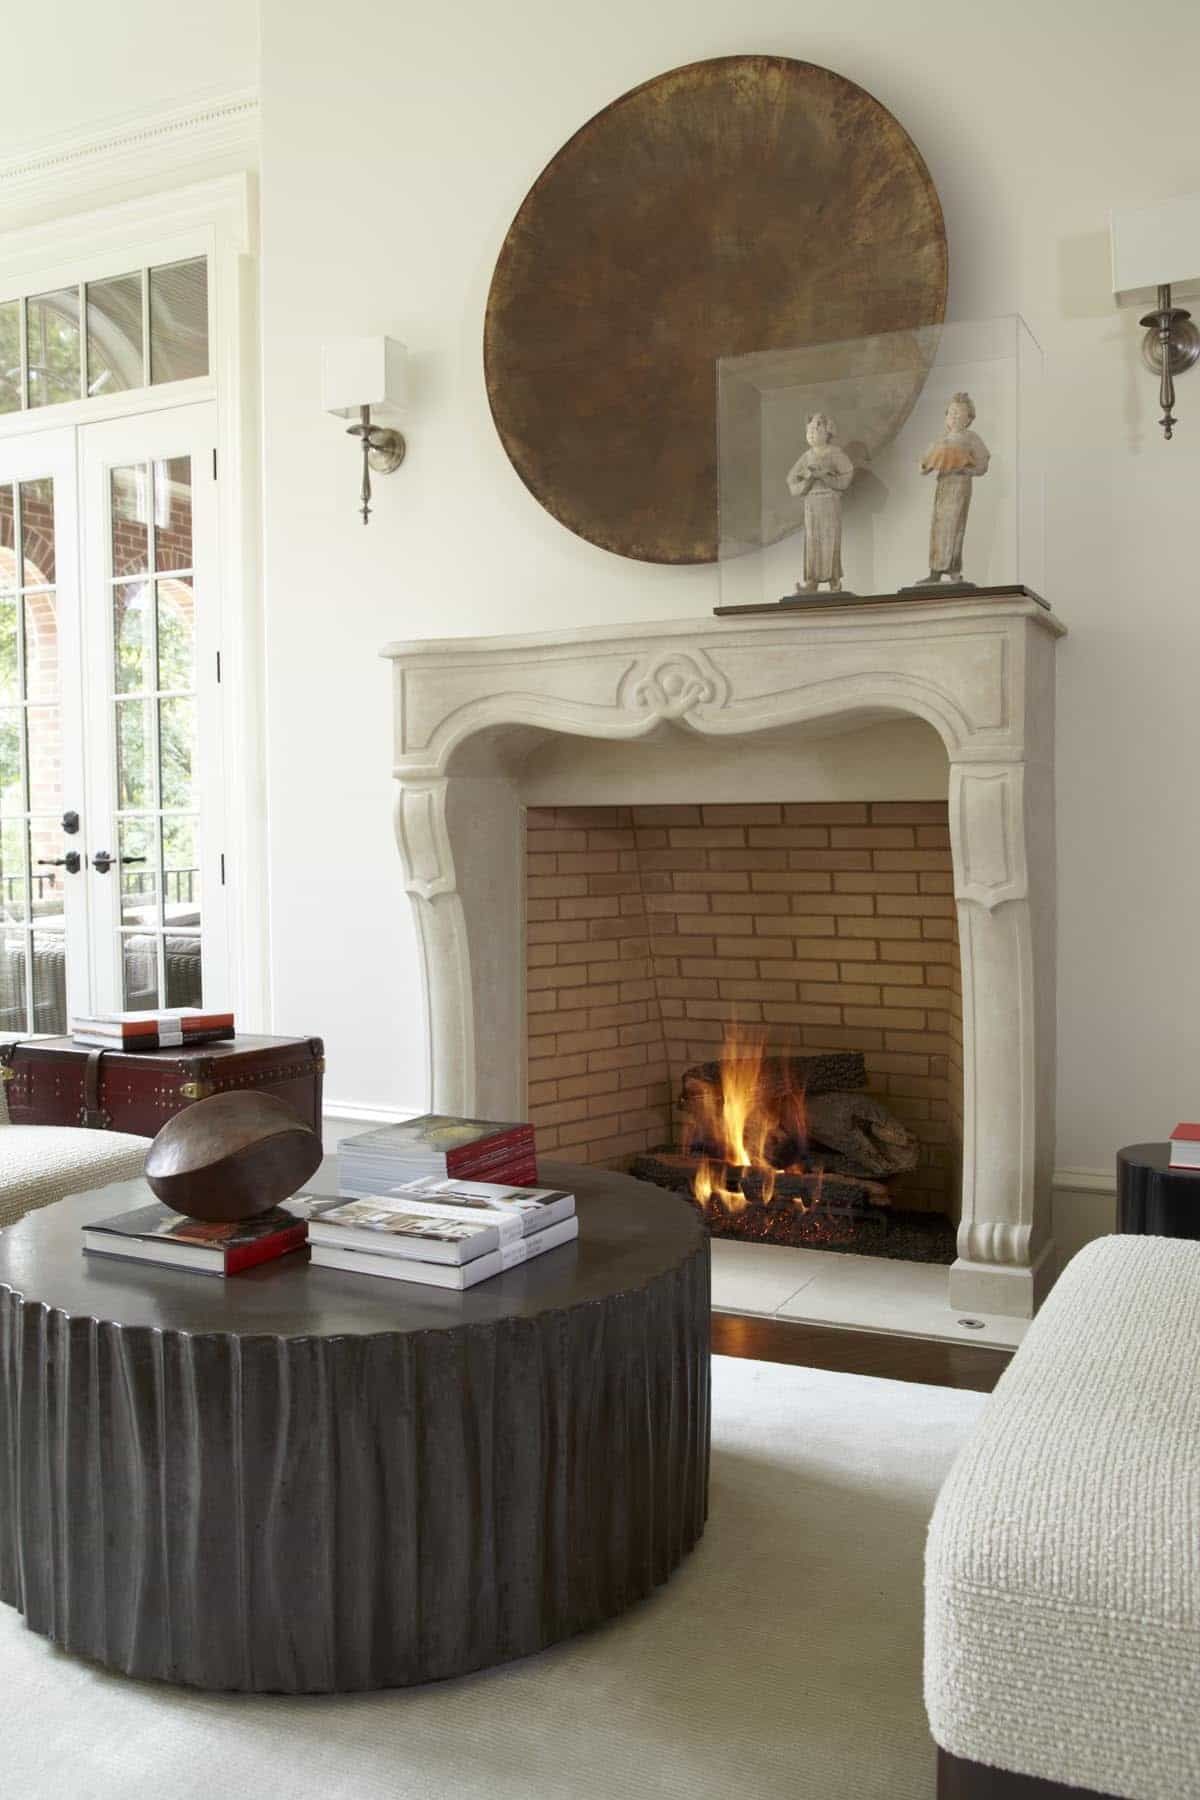 Asian Living Room With Decorative Fireplace Surround ...